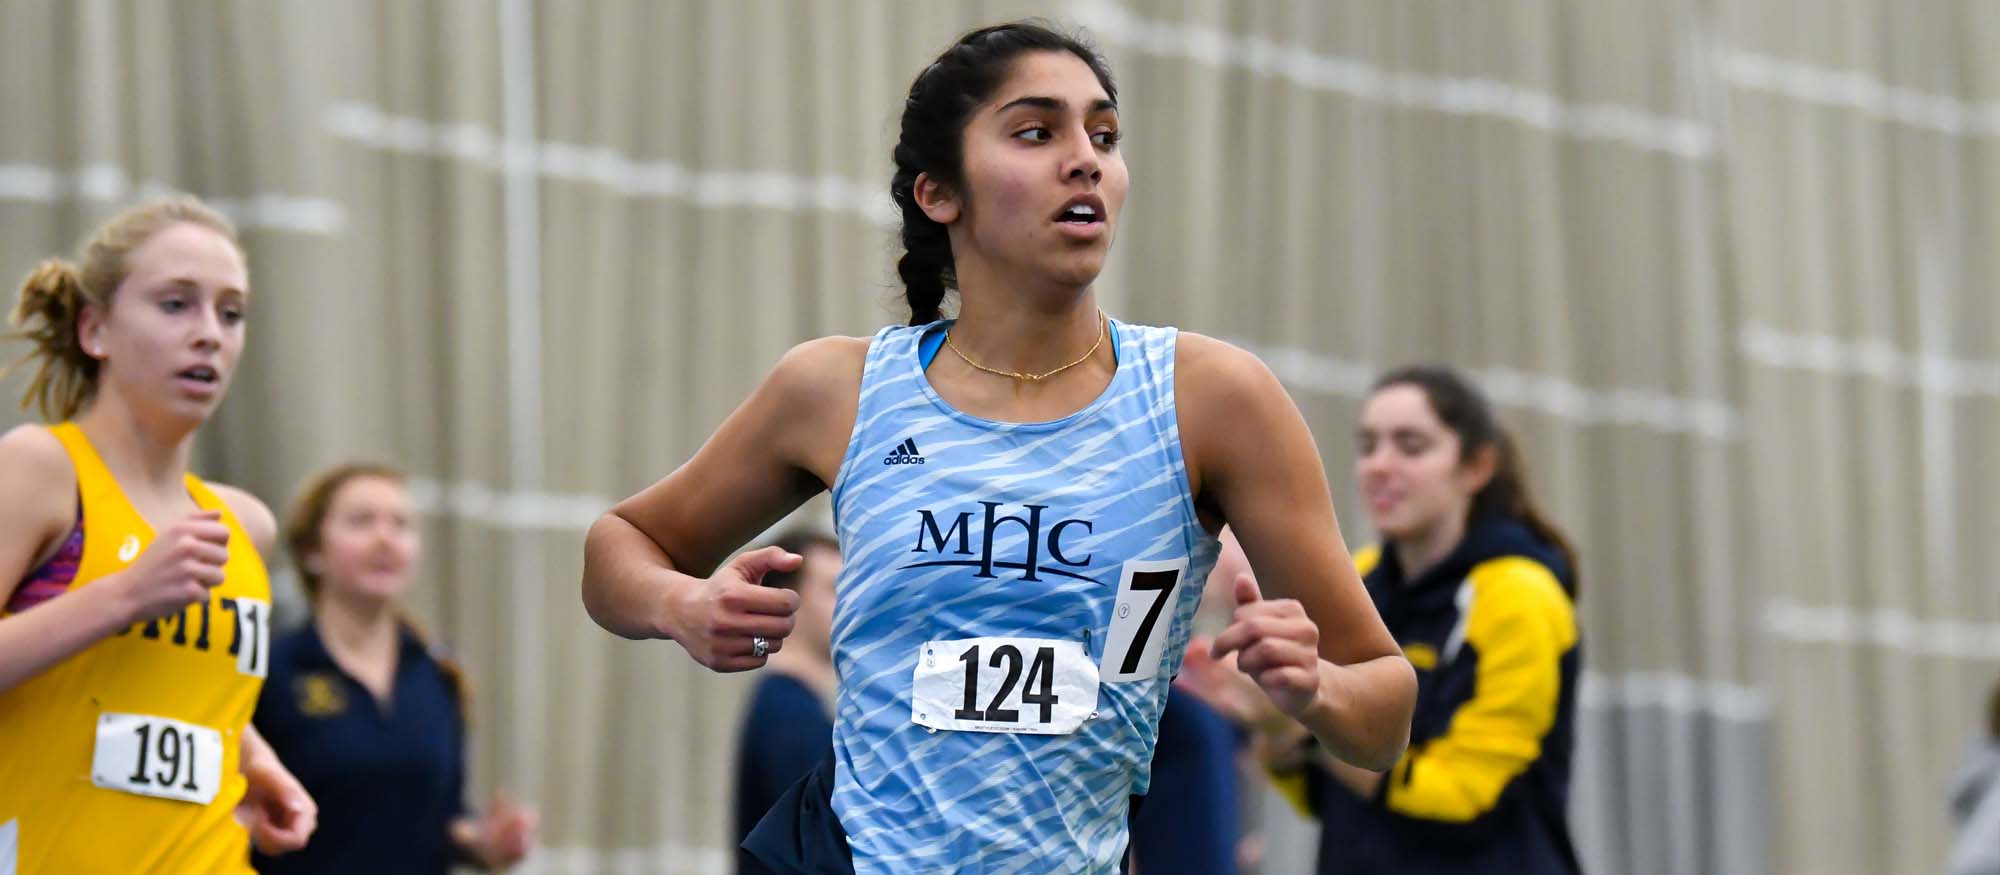 Track and Field Opens Season at Smith College Winter Classic; Jacob Breaks School Record in 1k